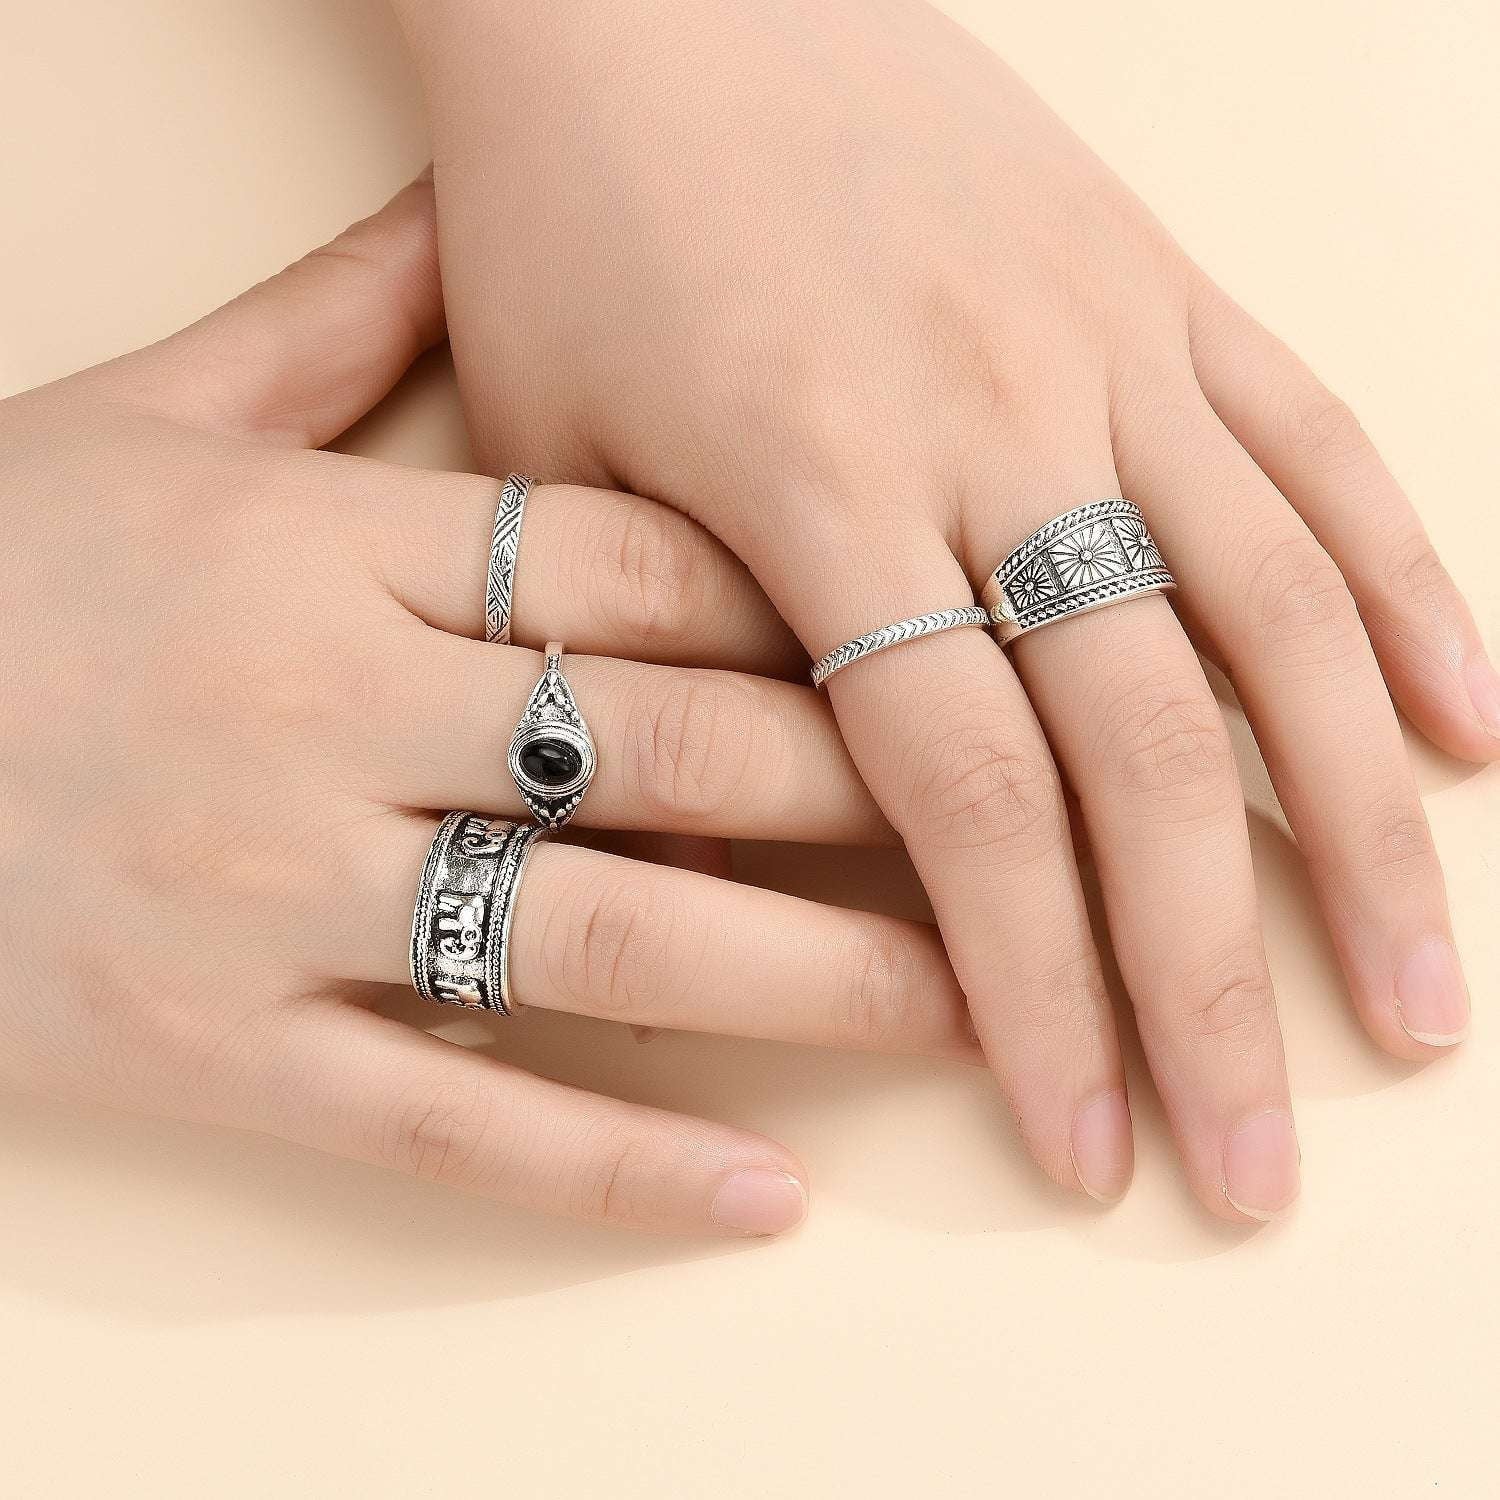 Ancient Silver Ring, Retro Zodiac Rings, Unisex Ring Collection - available at Sparq Mart